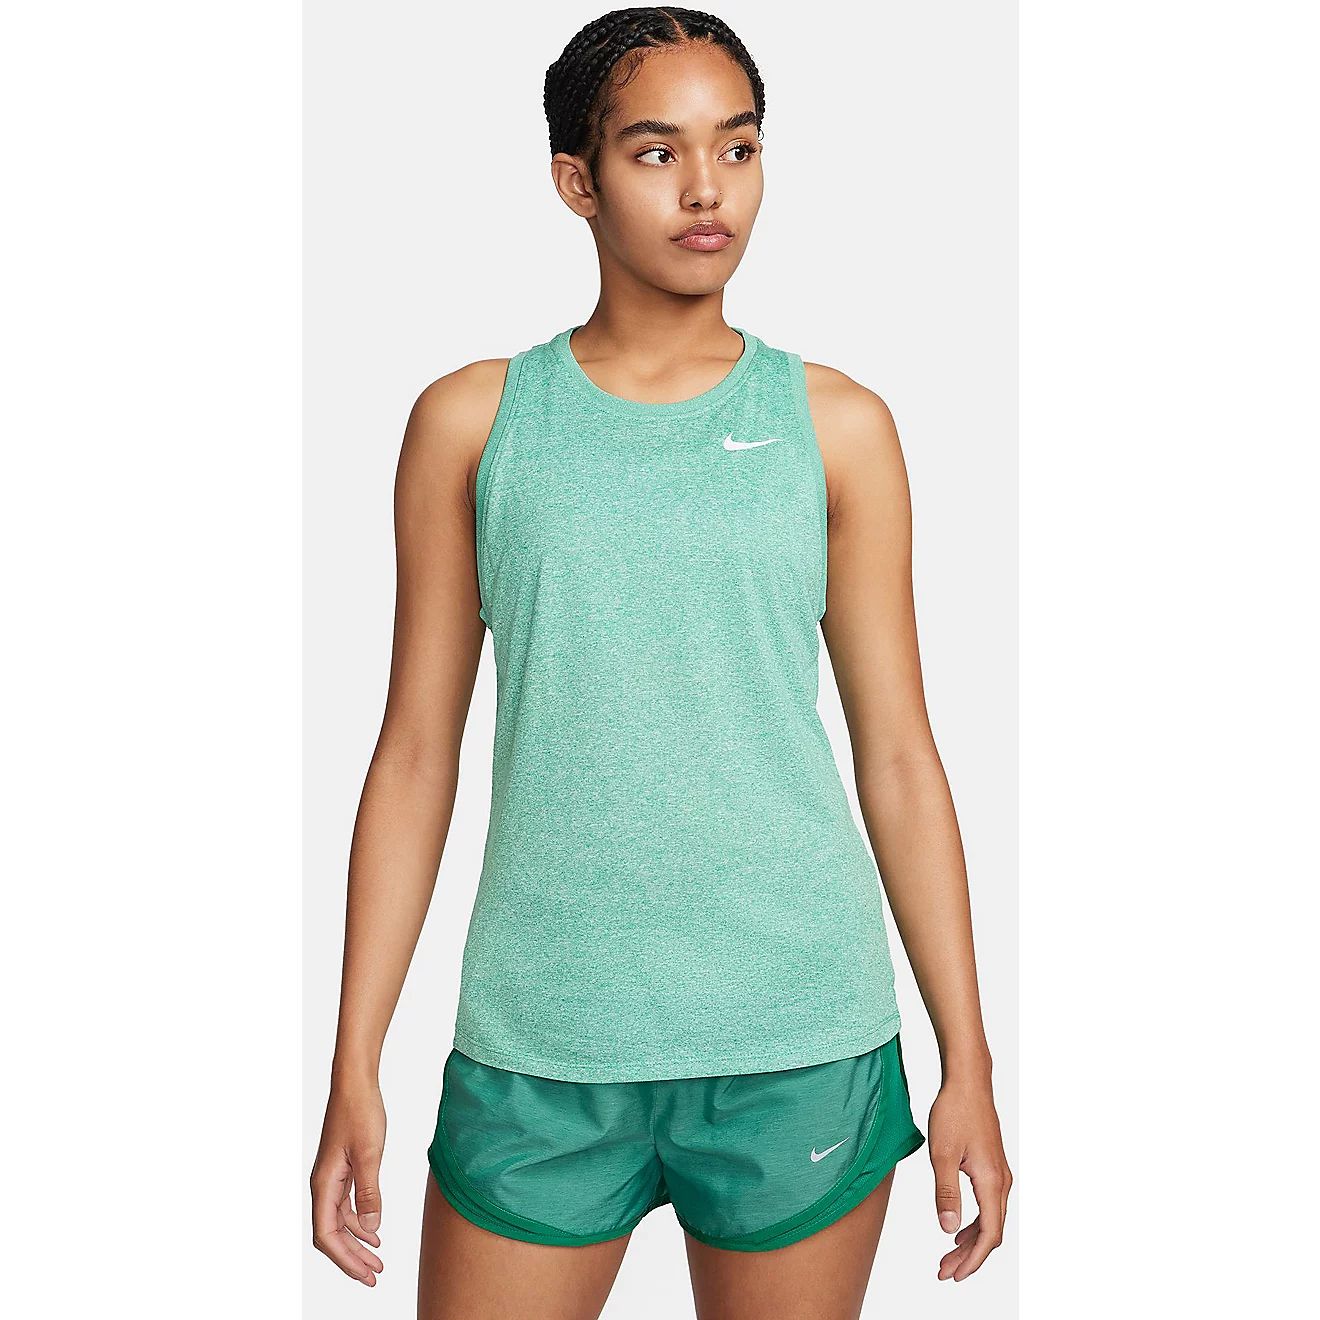 Nike Women's Dri-FIT Tank Top | Free Shipping at Academy | Academy Sports + Outdoors